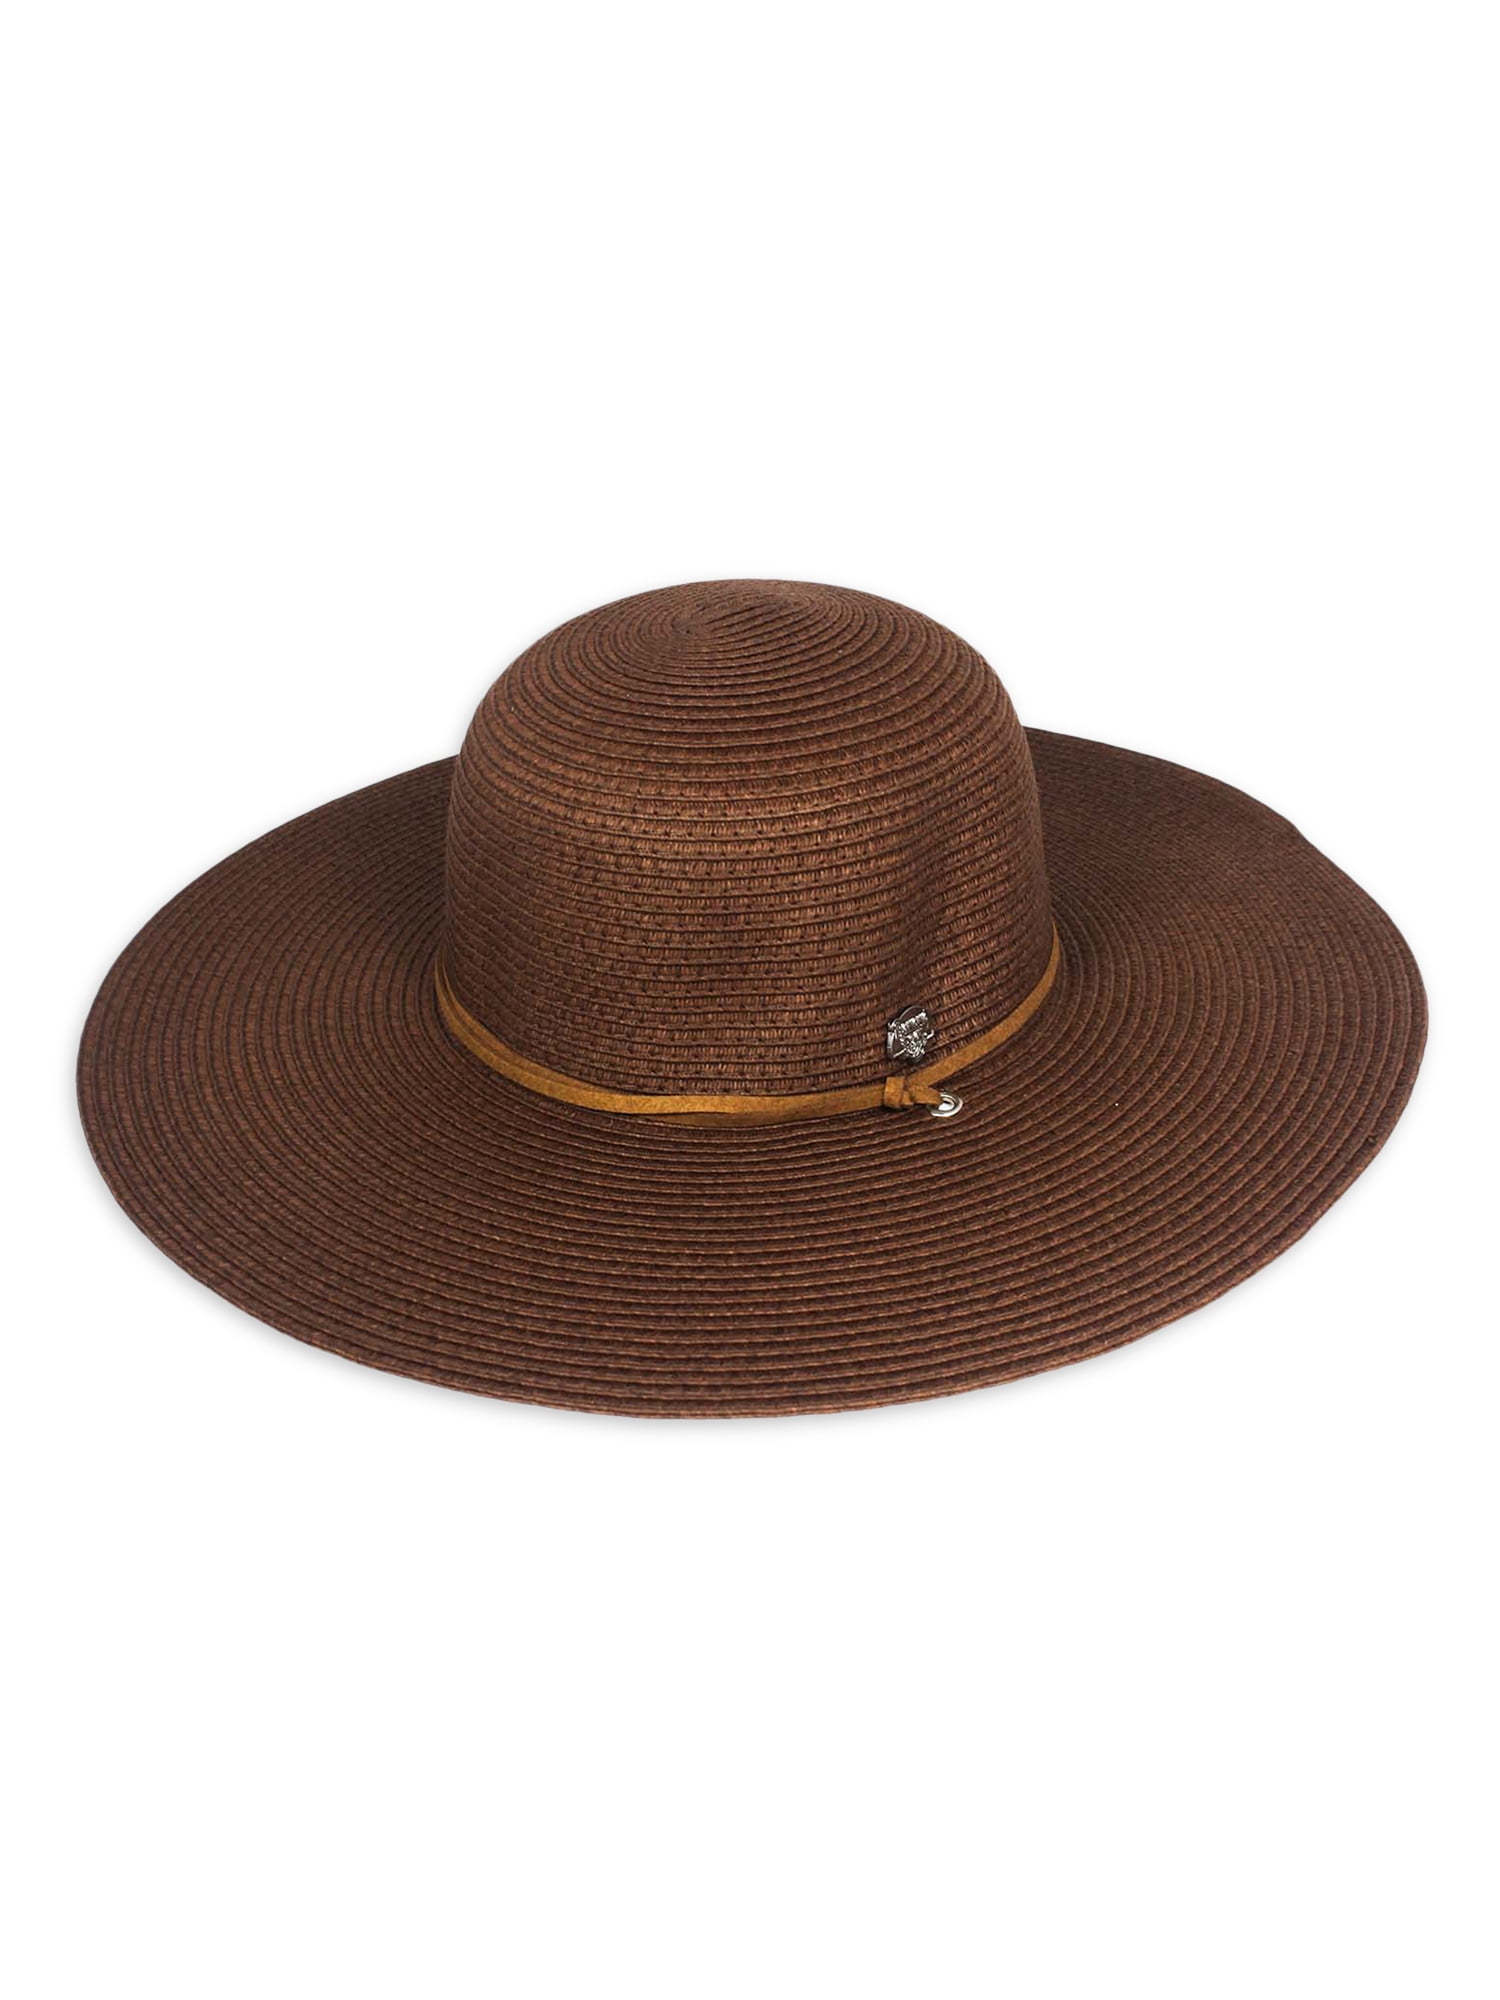 Ladies Banana Boat Packable Straw Floppy Sun Hat with Toggle